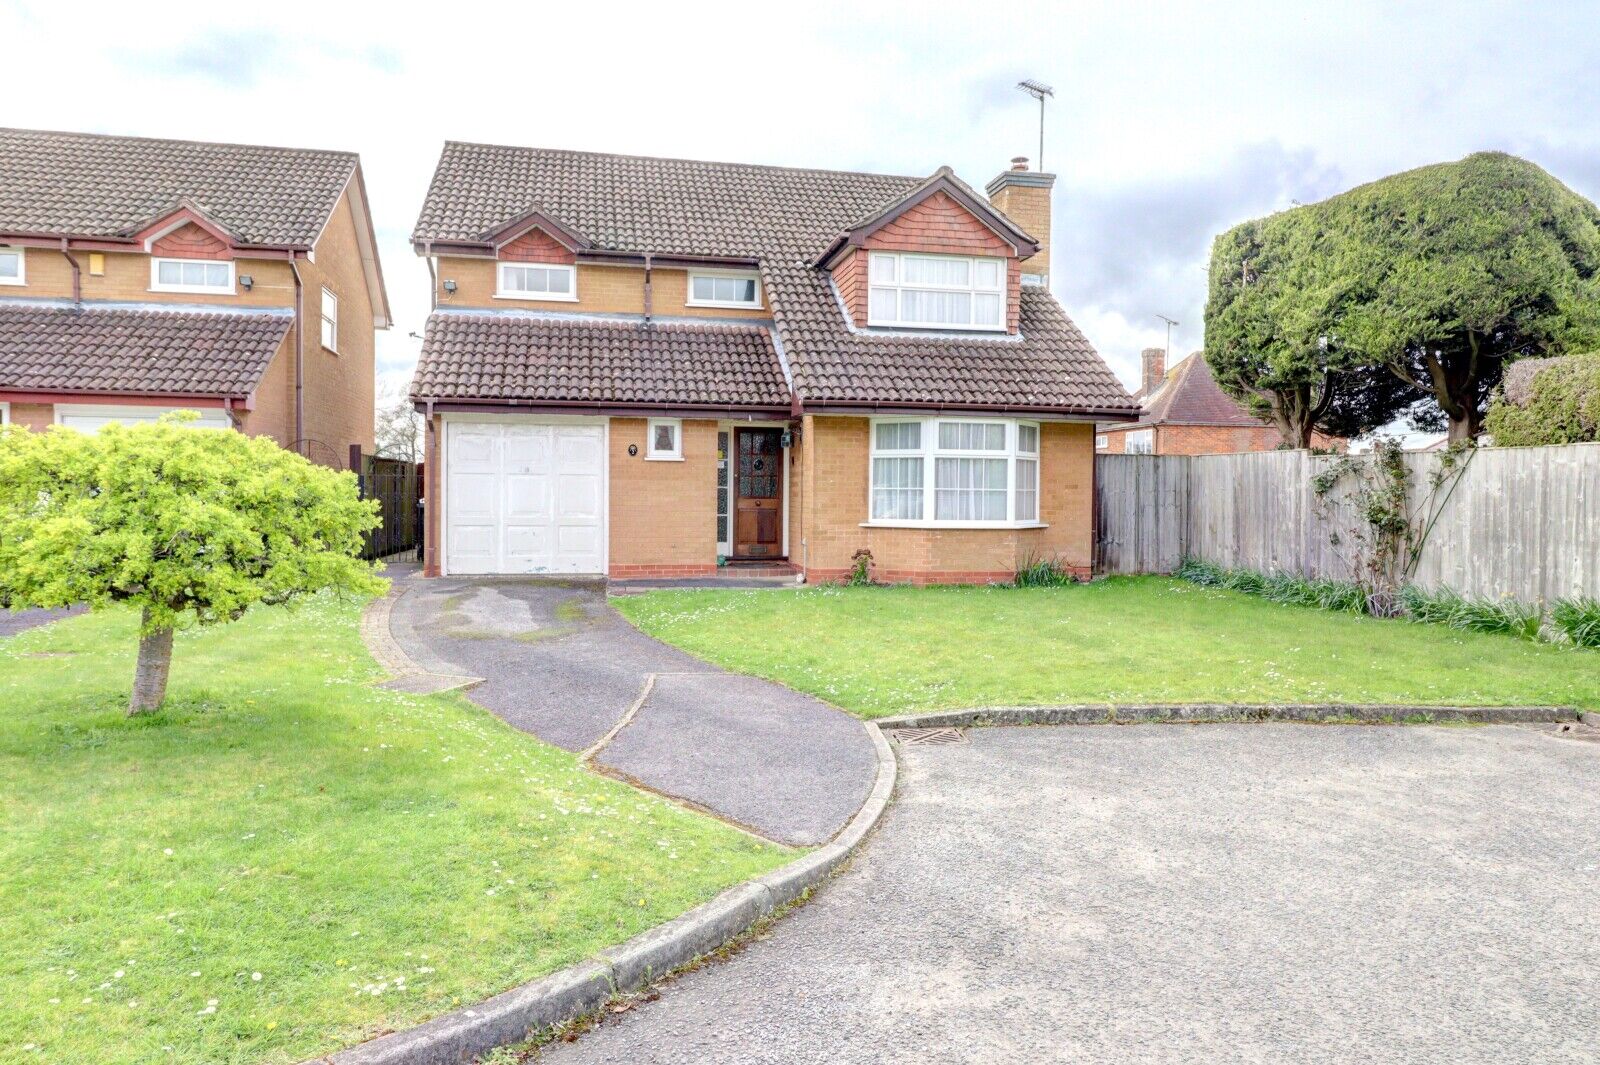 4 bedroom detached house for sale Dean Way, Holmer Green, HP15, main image